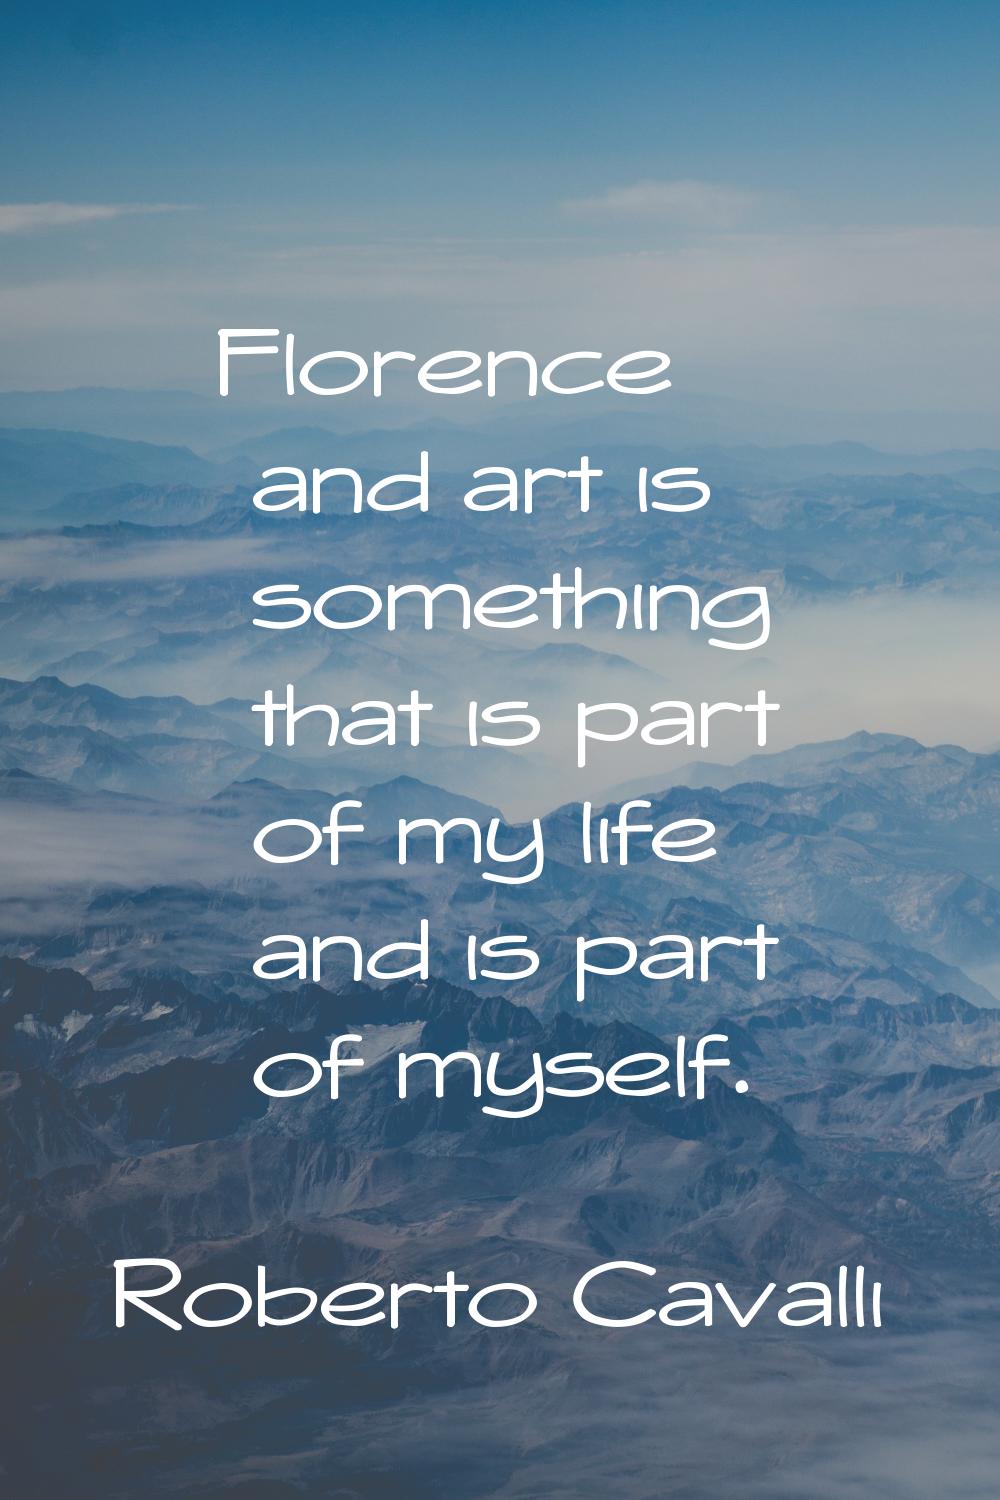 Florence and art is something that is part of my life and is part of myself.